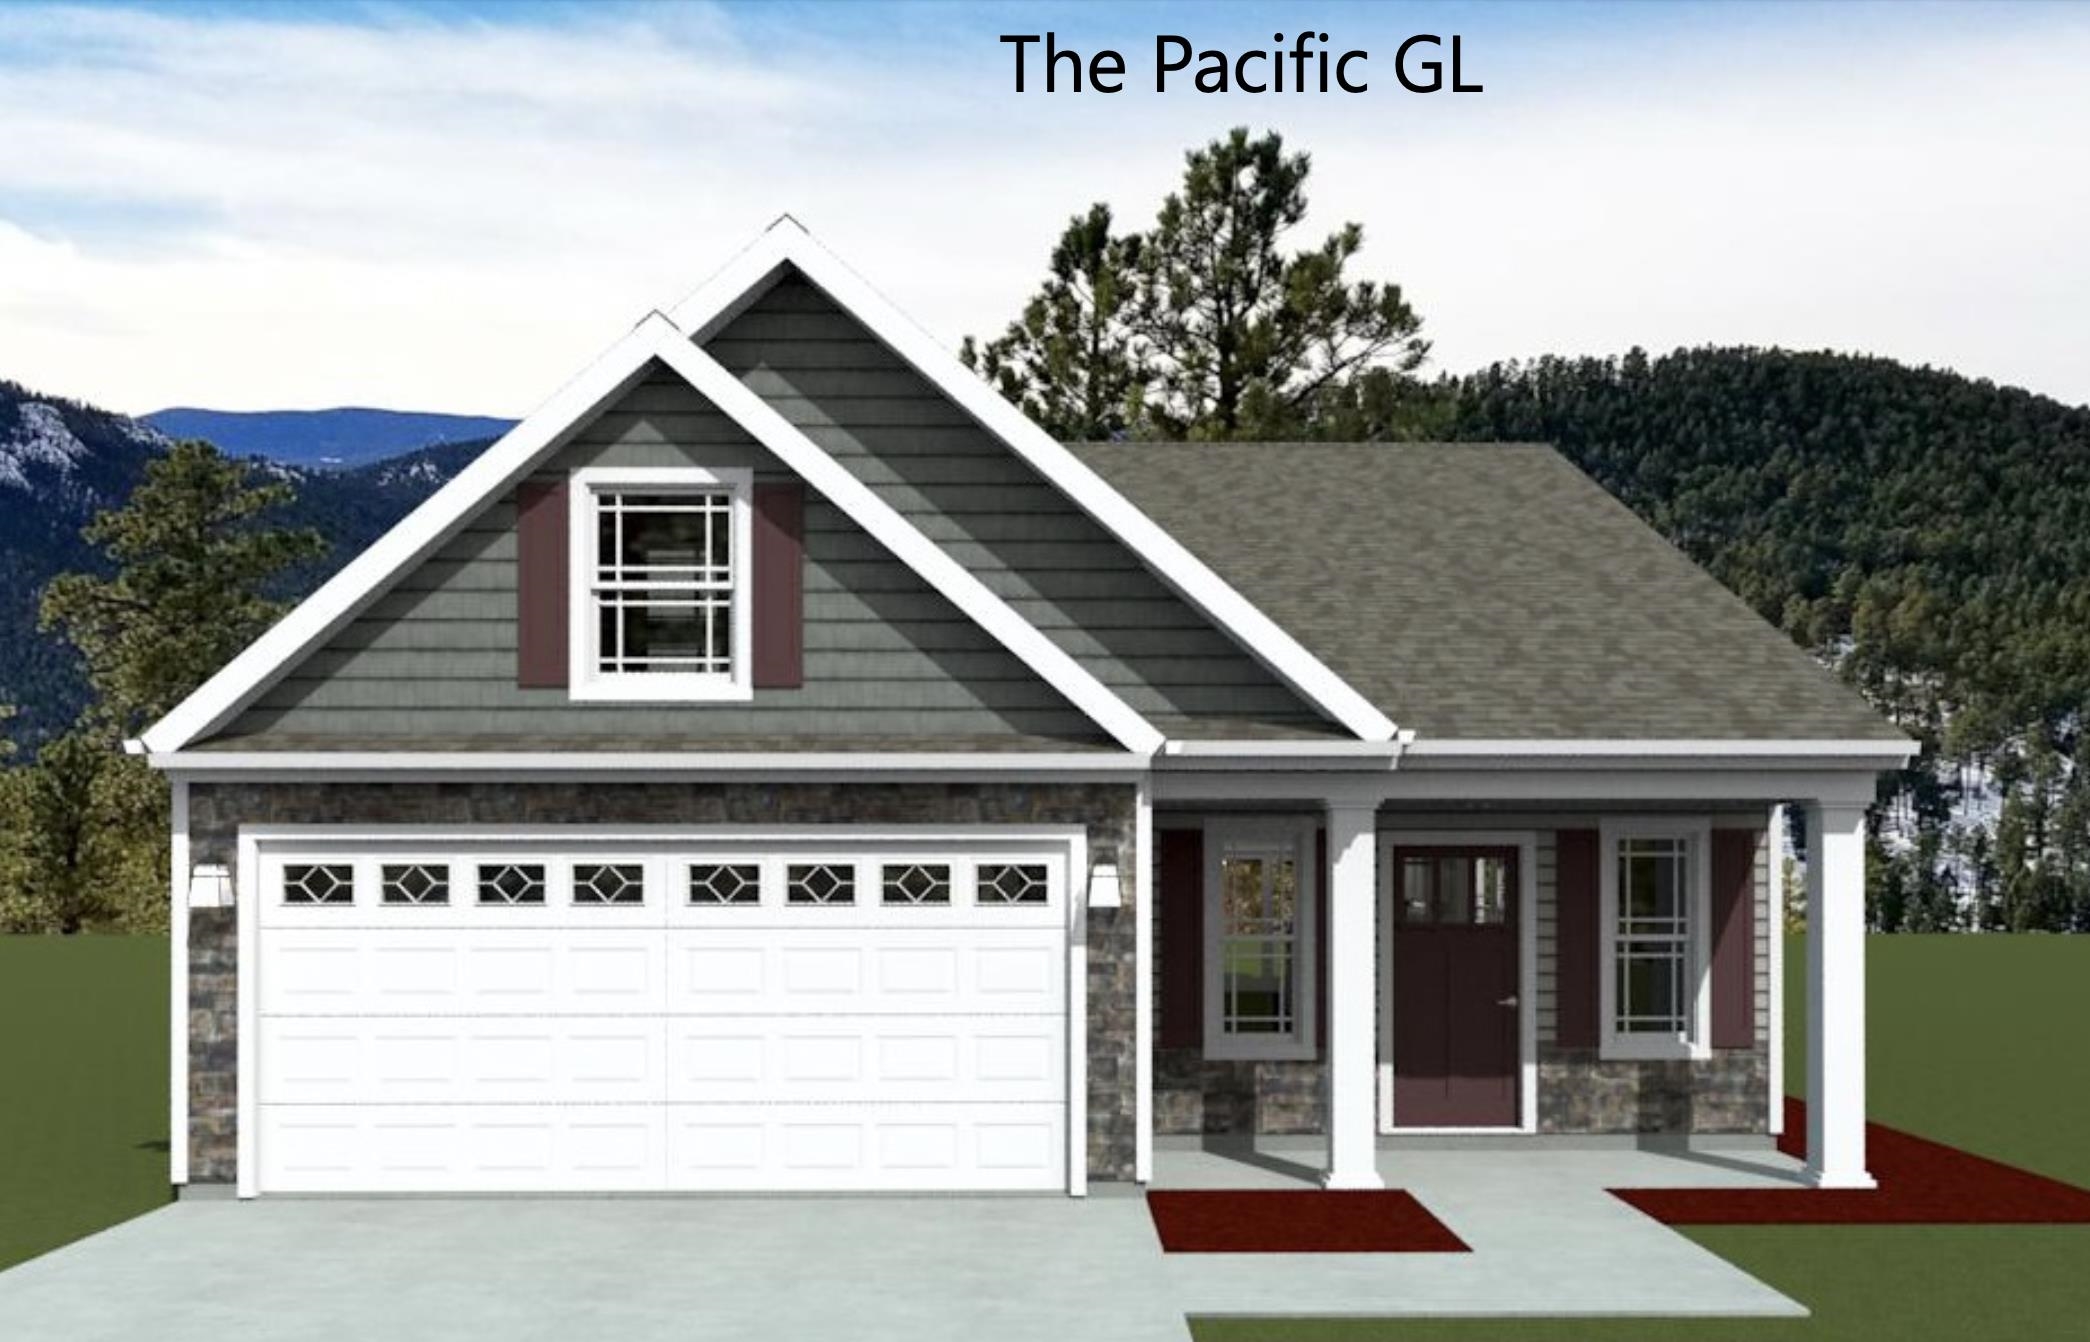 The Pacific (Lot 10) offers a modern, open concept living area perfect for entertaining.  3 bedroom, 2 bath. Complete with the trademark chair rail, crown molding, and rope lighting.  12'x12' sunroom in addition to the 12'x12'' covered back patio.   30-year architectural shingles, site-built construction, and a 10 year limited warranty are included to give you peace of mind.  Preferred Lender/Attorney Closing Costs Incentive Offered!